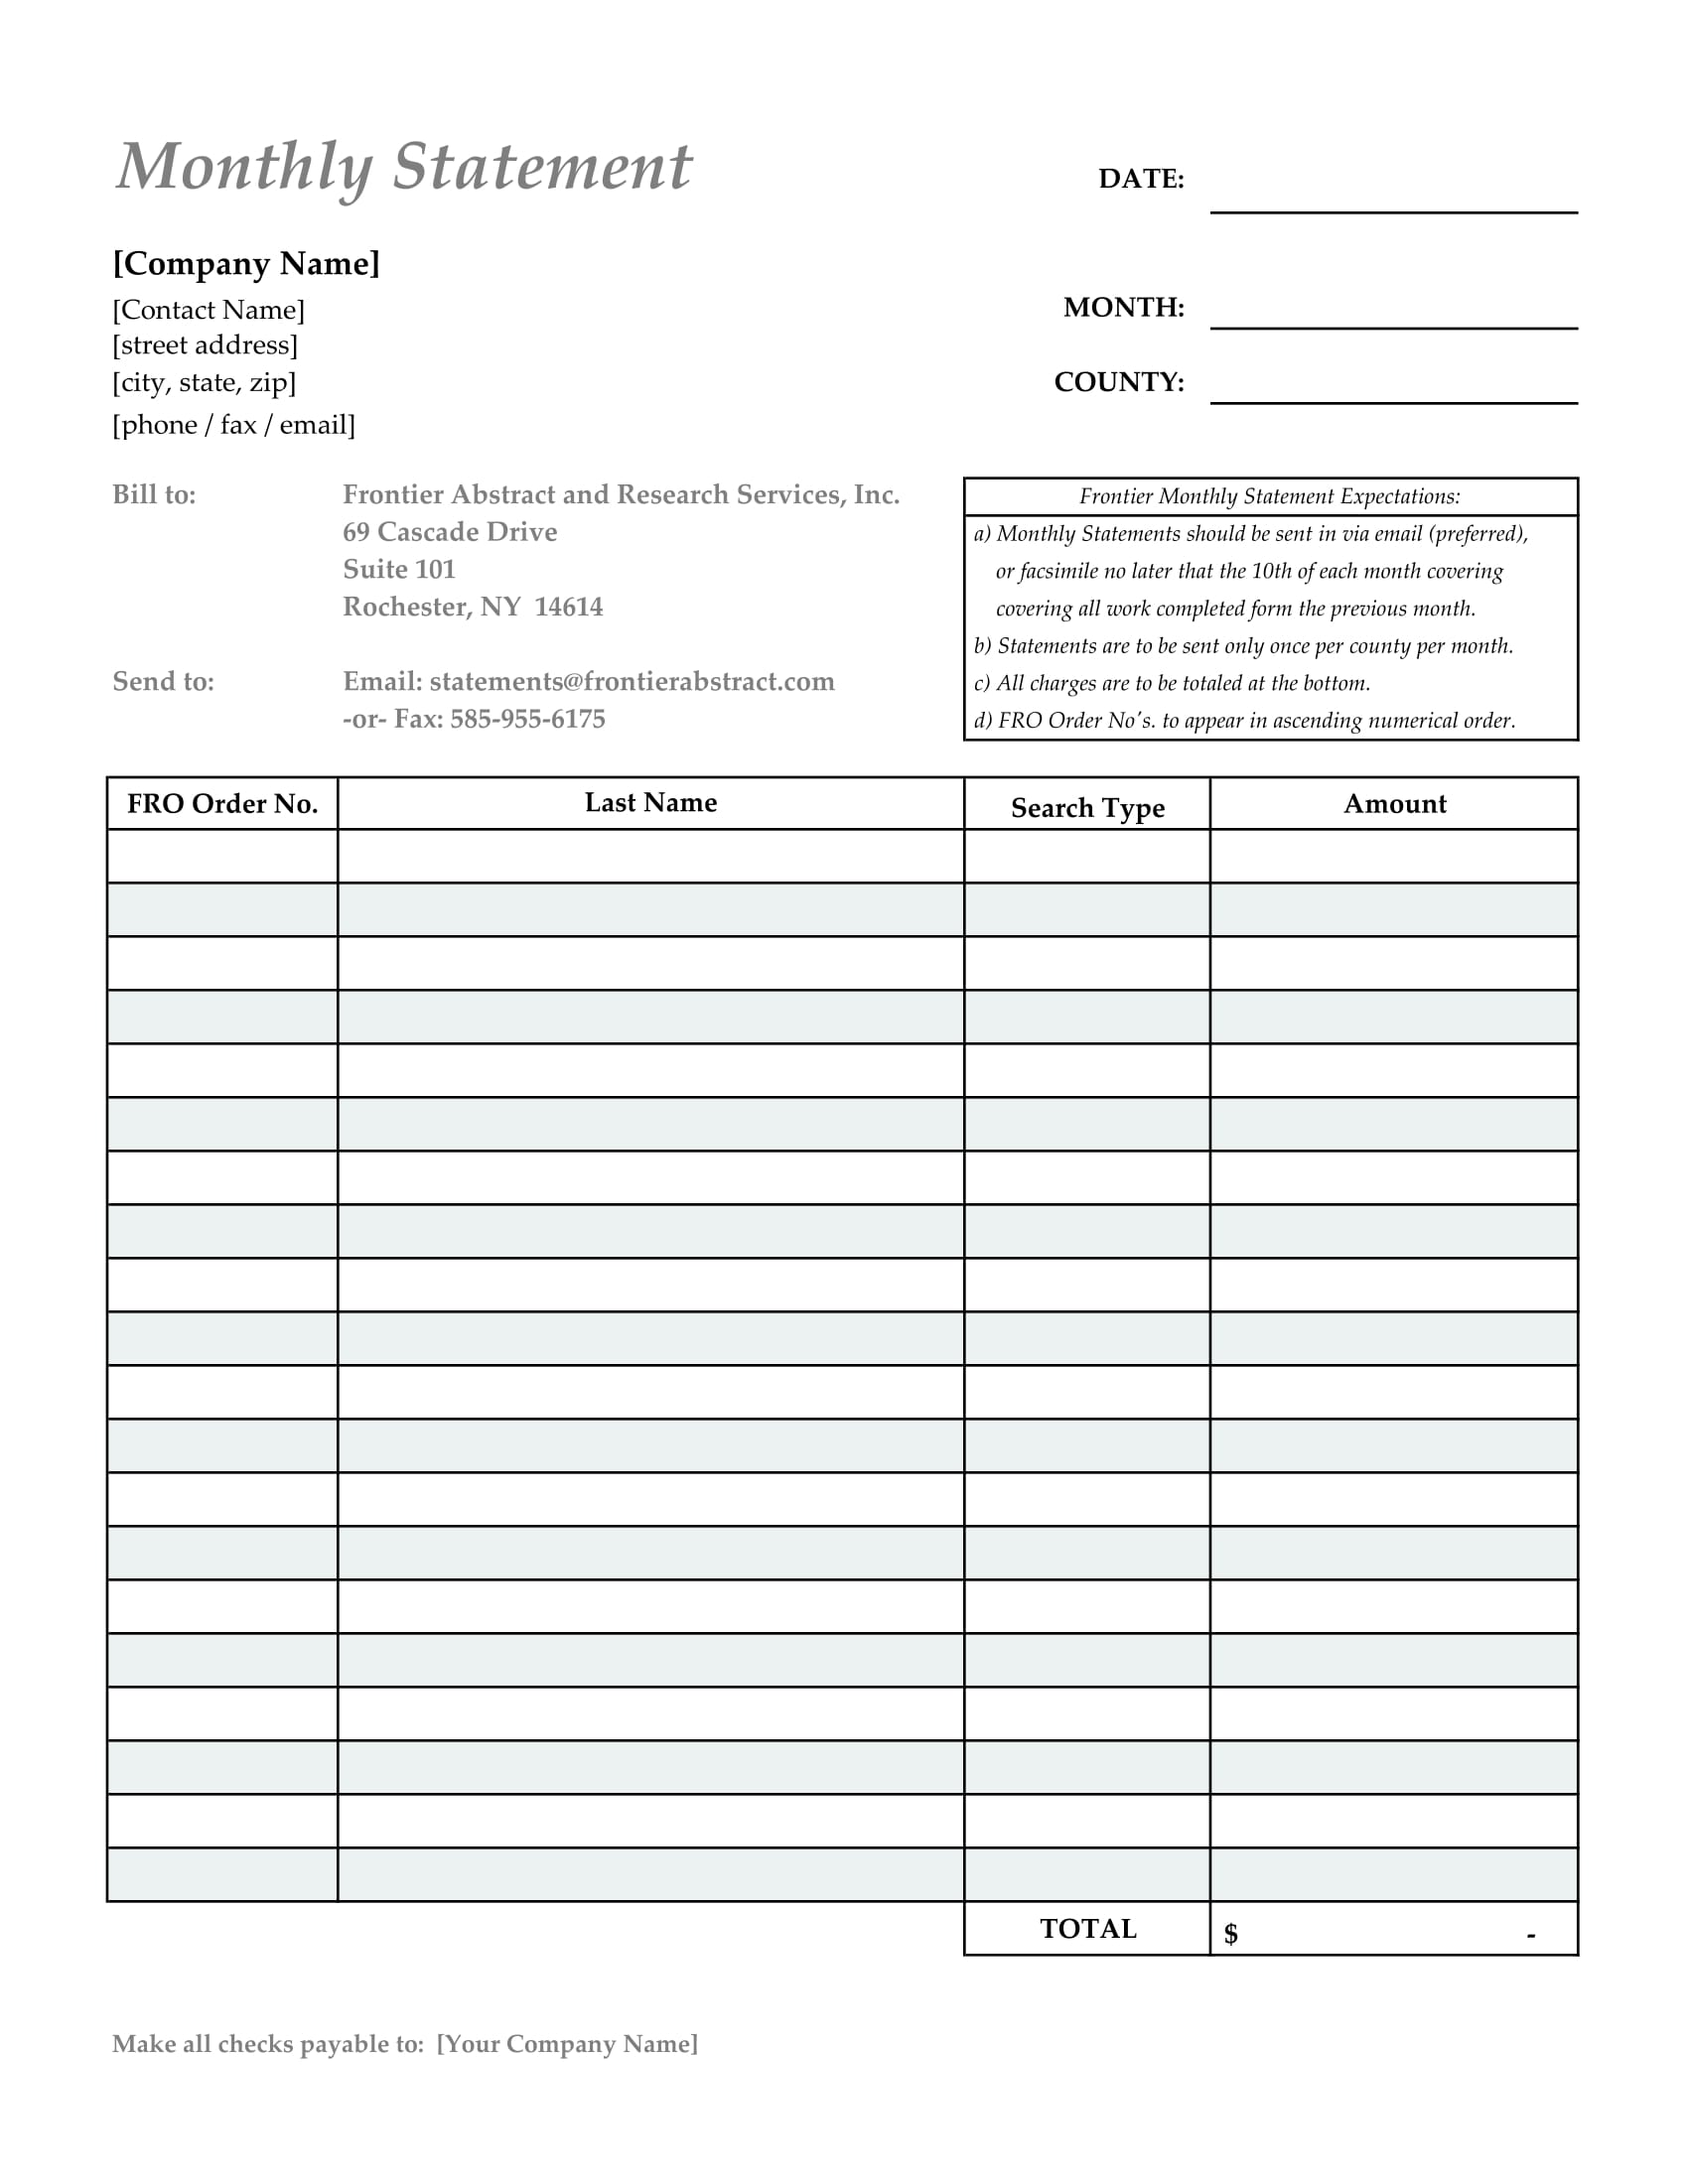 Monthly Billing Invoice Statement